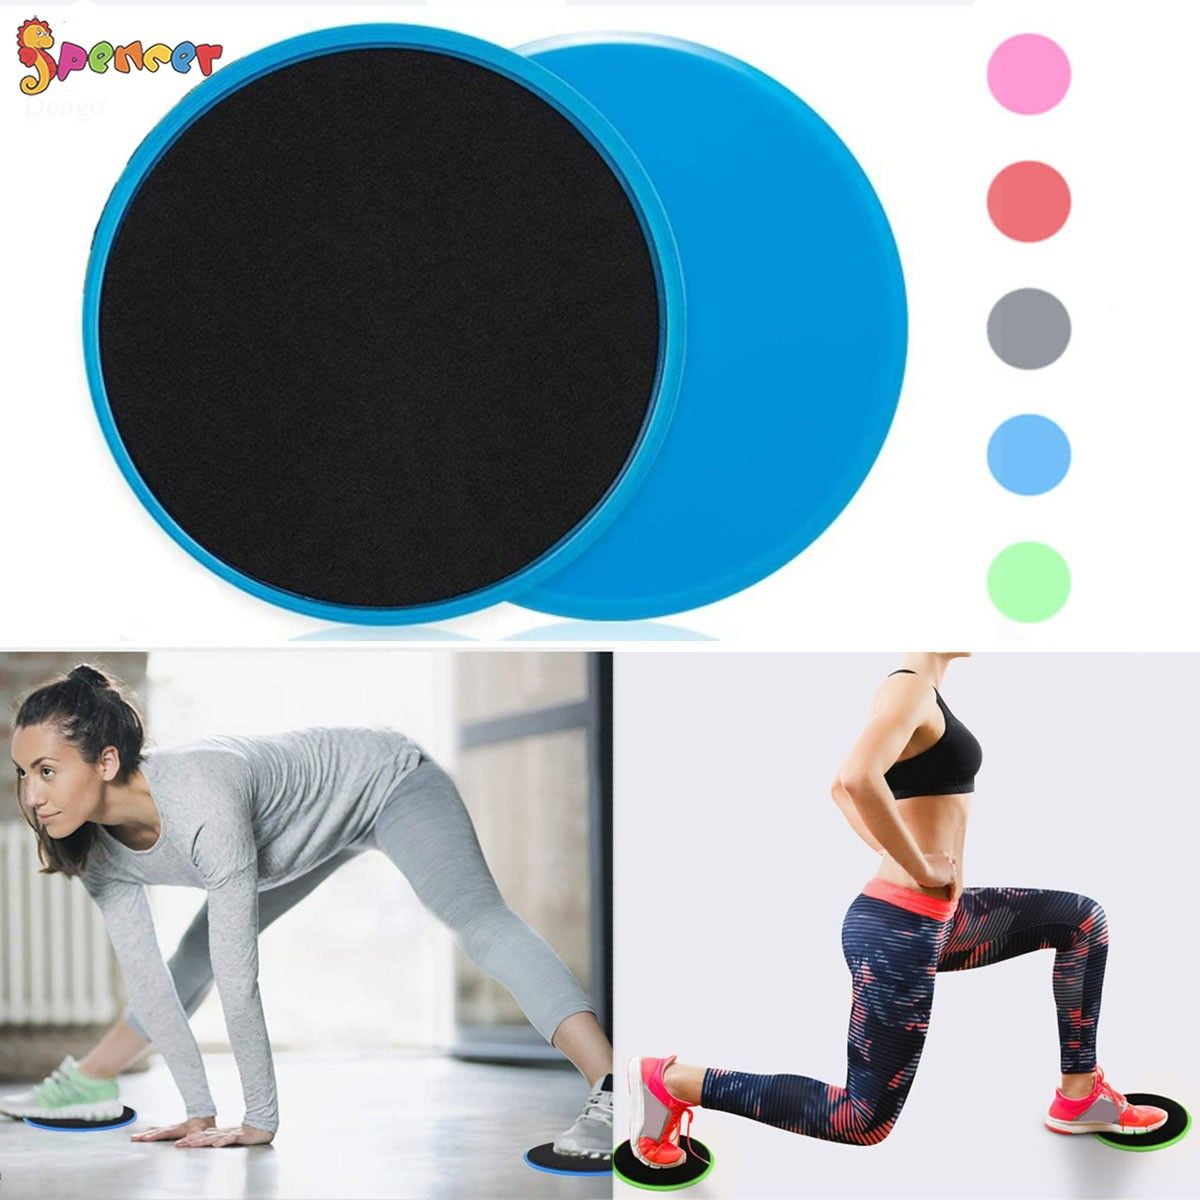 Spencer Core Exercise Gliders Floor Sliders - 2 Dual Sided Gliding Discs  Fitness Equipment for Full Body Workout Green